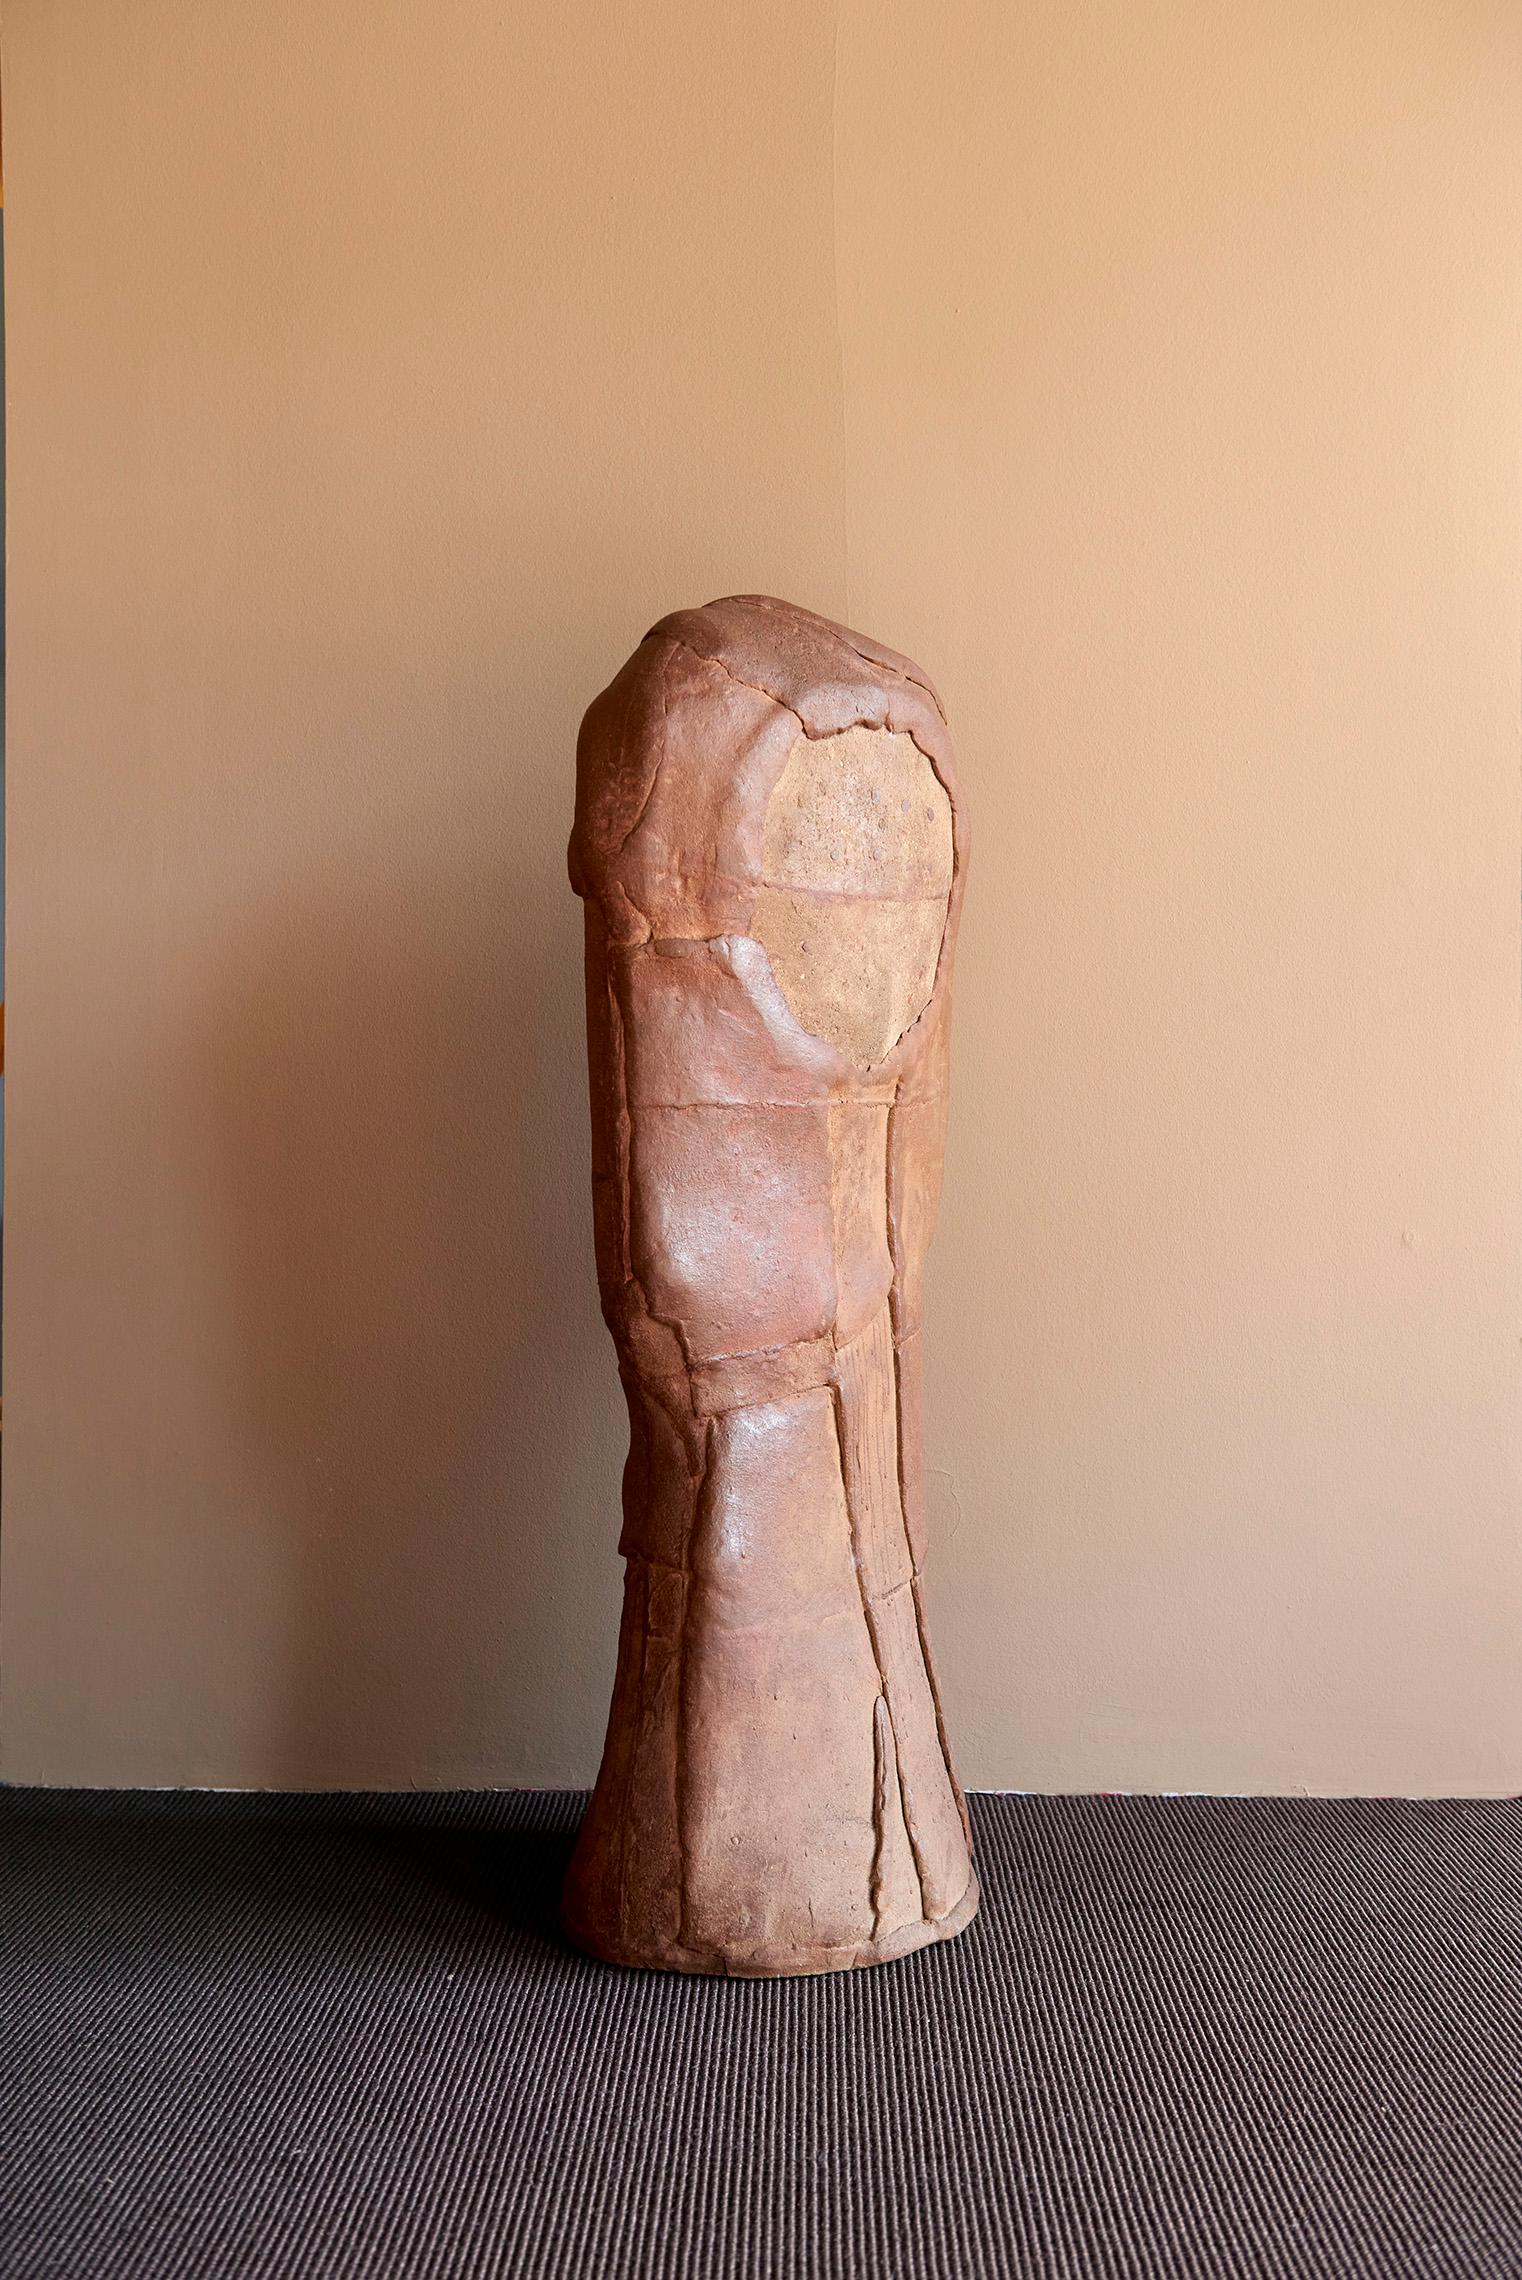 Huge Daniel Rhodes sculpture, USA, 1970s
Signed and in excellent condition.